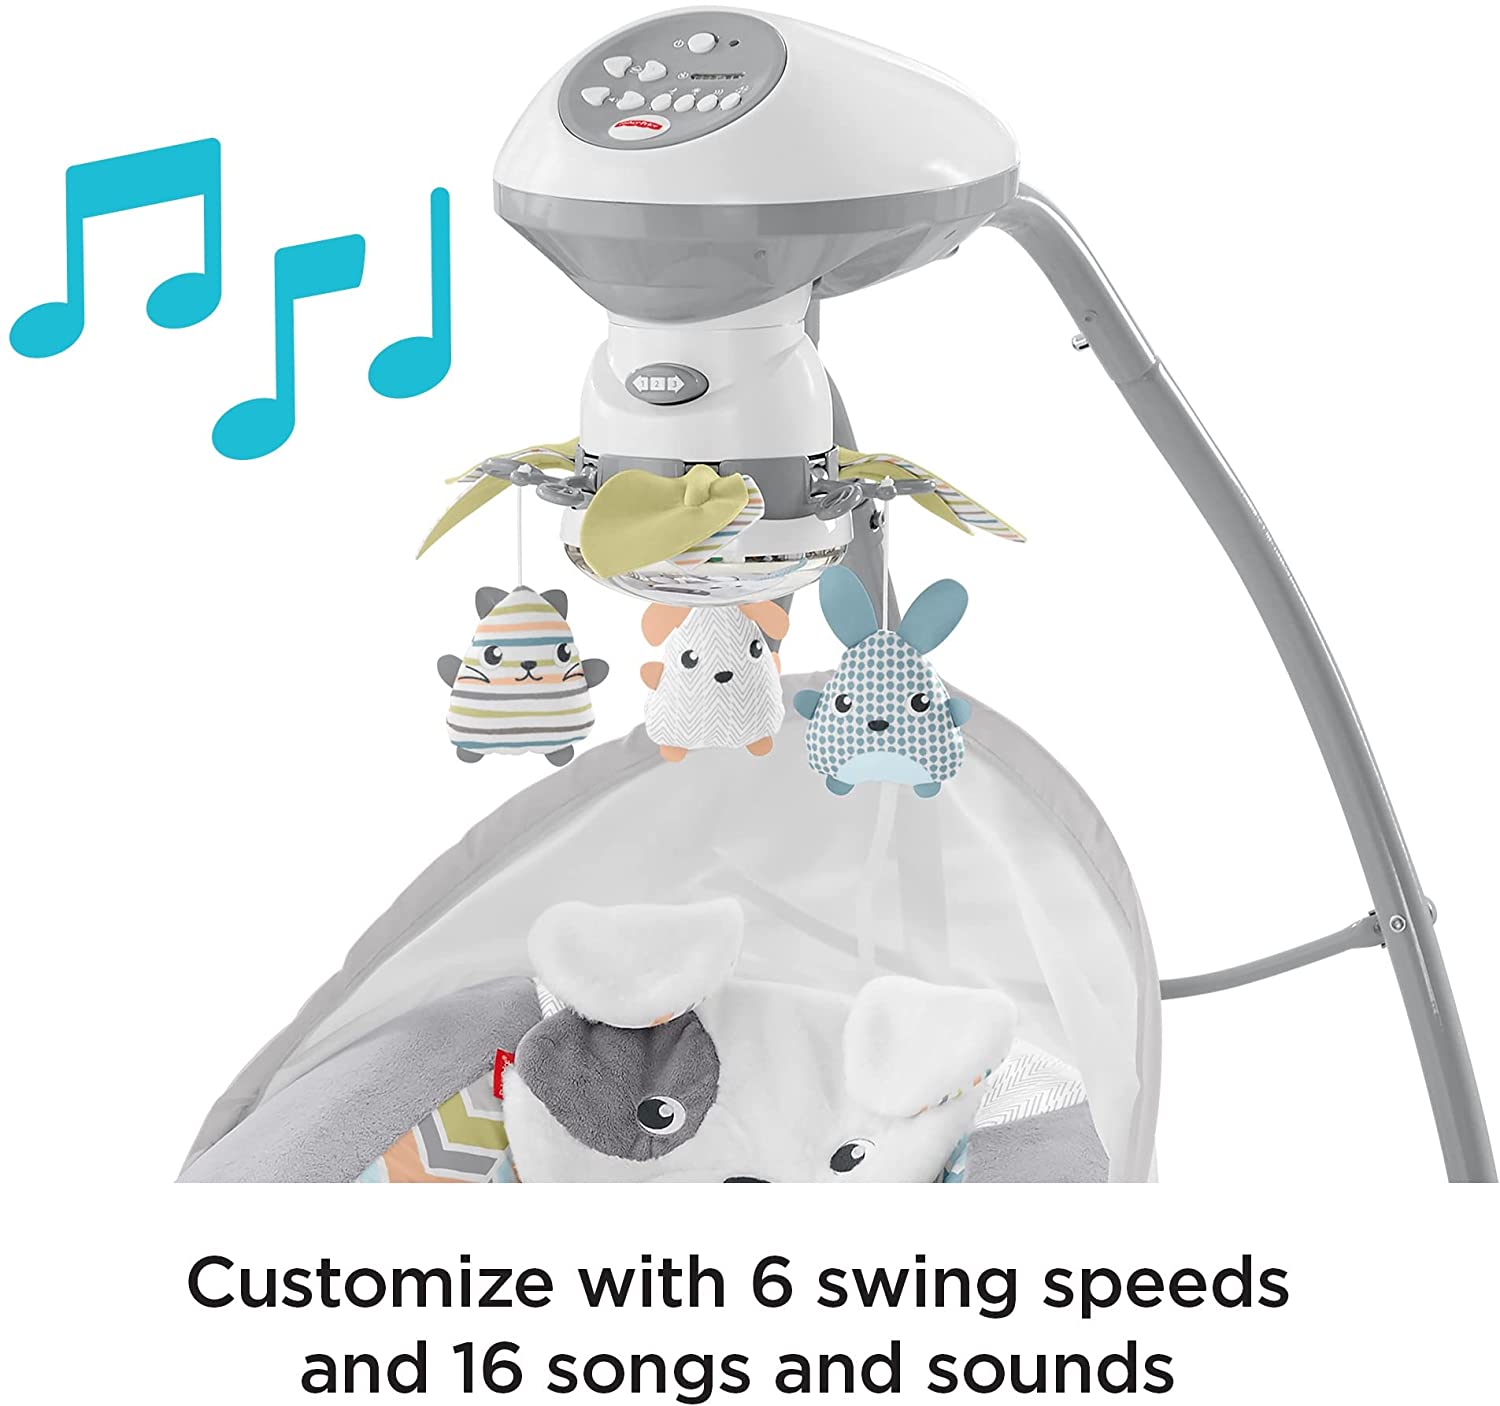 Fisher-Price Sweet Snugapuppy Swing - with Music, Sounds and Motorized Mobile